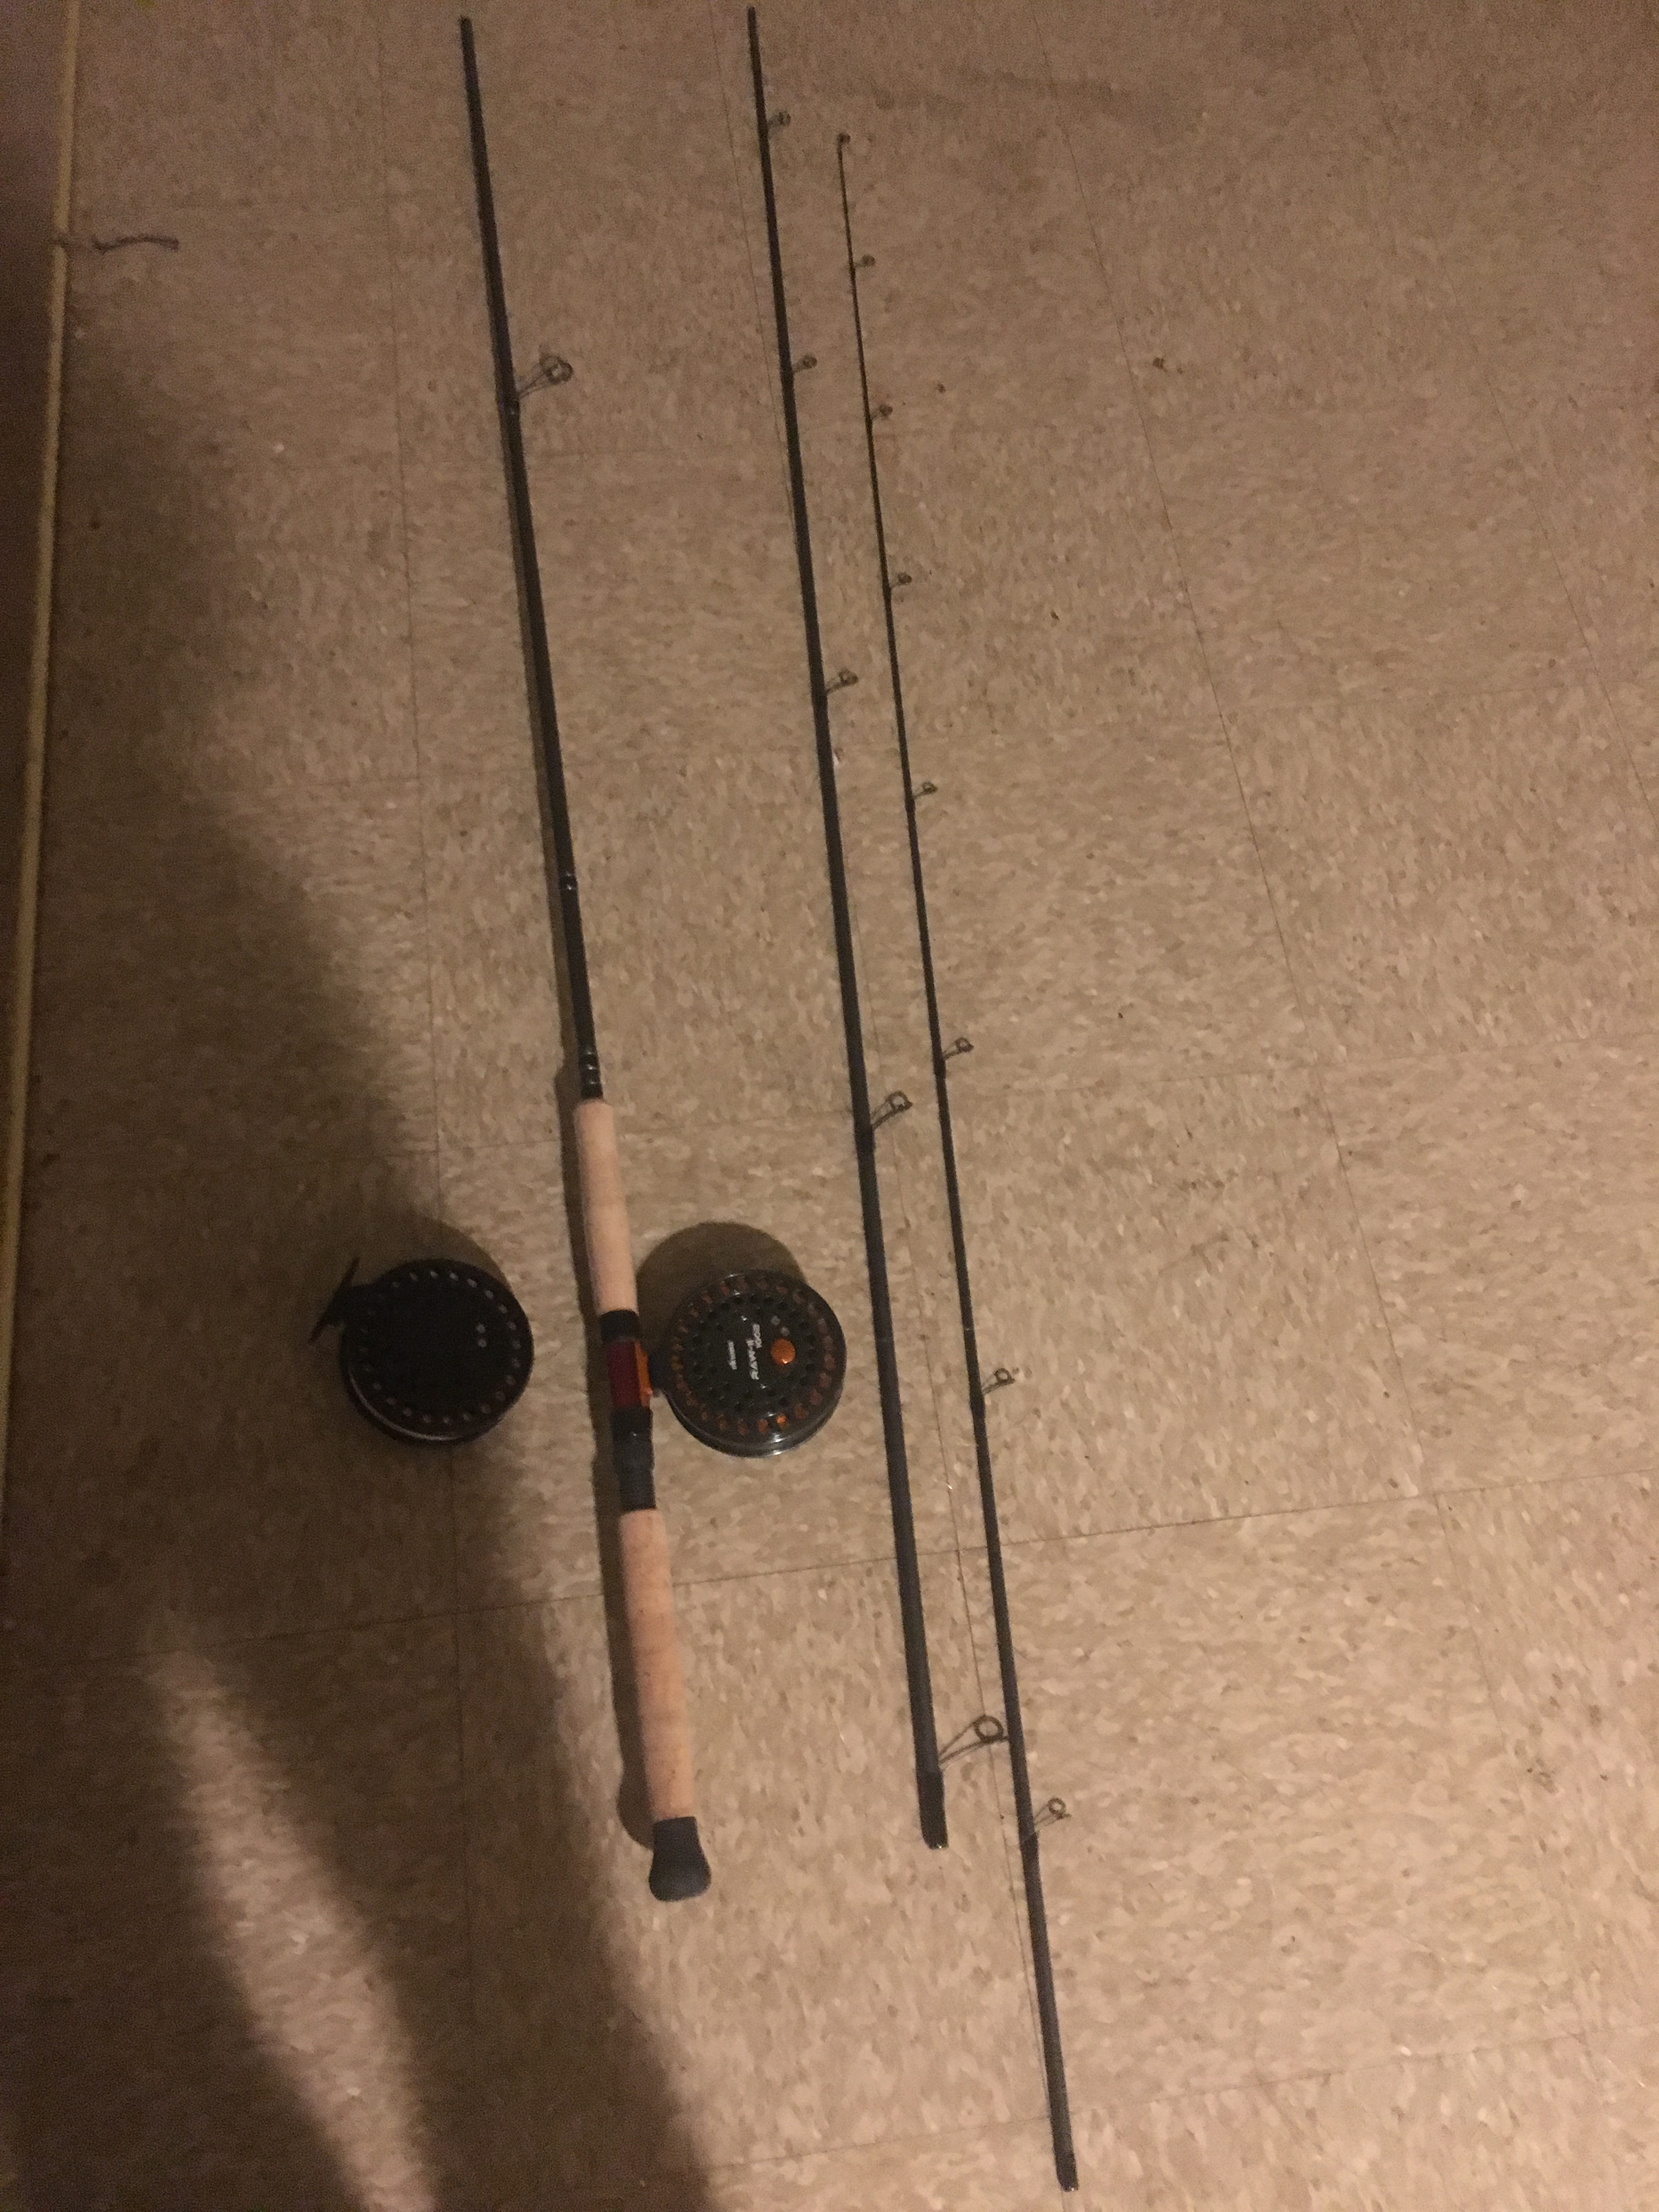 Okuma Aventa 15'6 float rod with okuma raw 2 reel and a Sheffield 1002 reel  - Classifieds - Buy, Sell, Trade or Rent - Lake Ontario United - Lake  Ontario's Largest Fishing